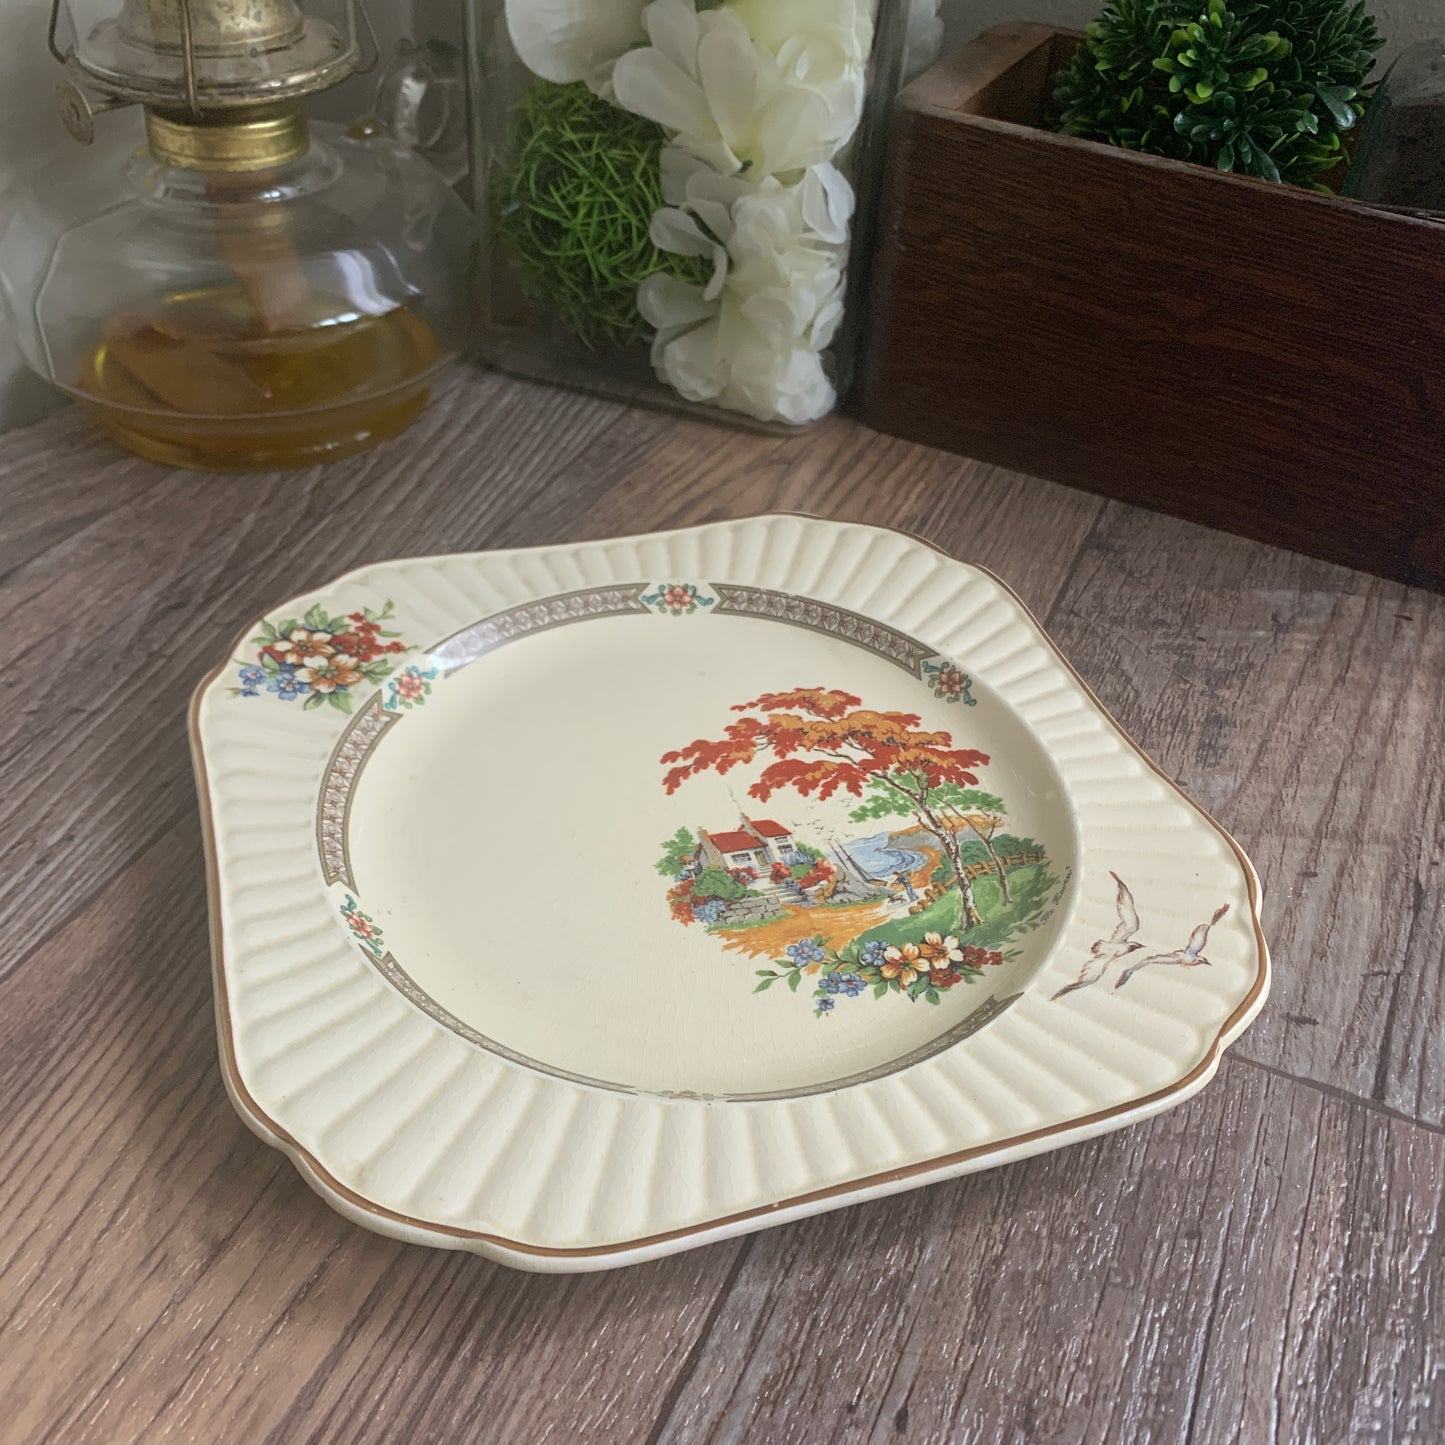 Booths China Plate with Garden Scene, Antique China Plate Vintage Farmhouse Decor